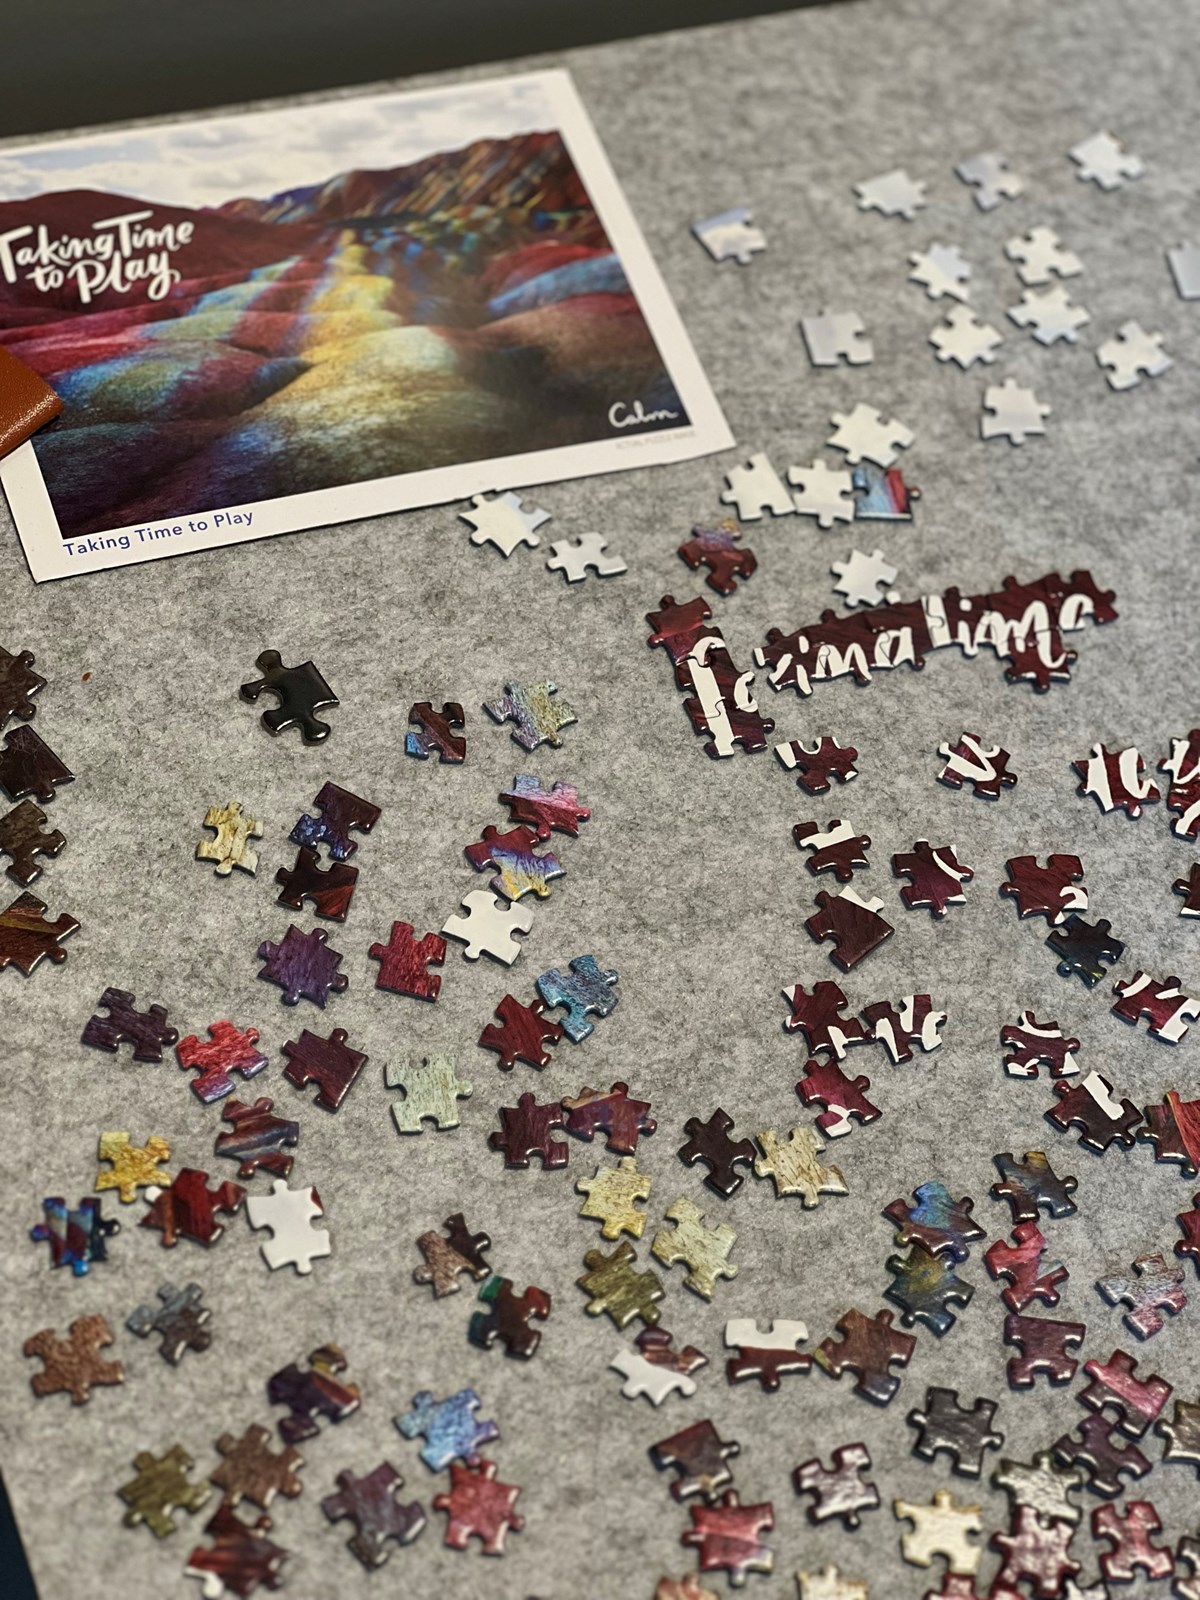 multicolored puzzle on puzzle mat with the writing "taking time to play"